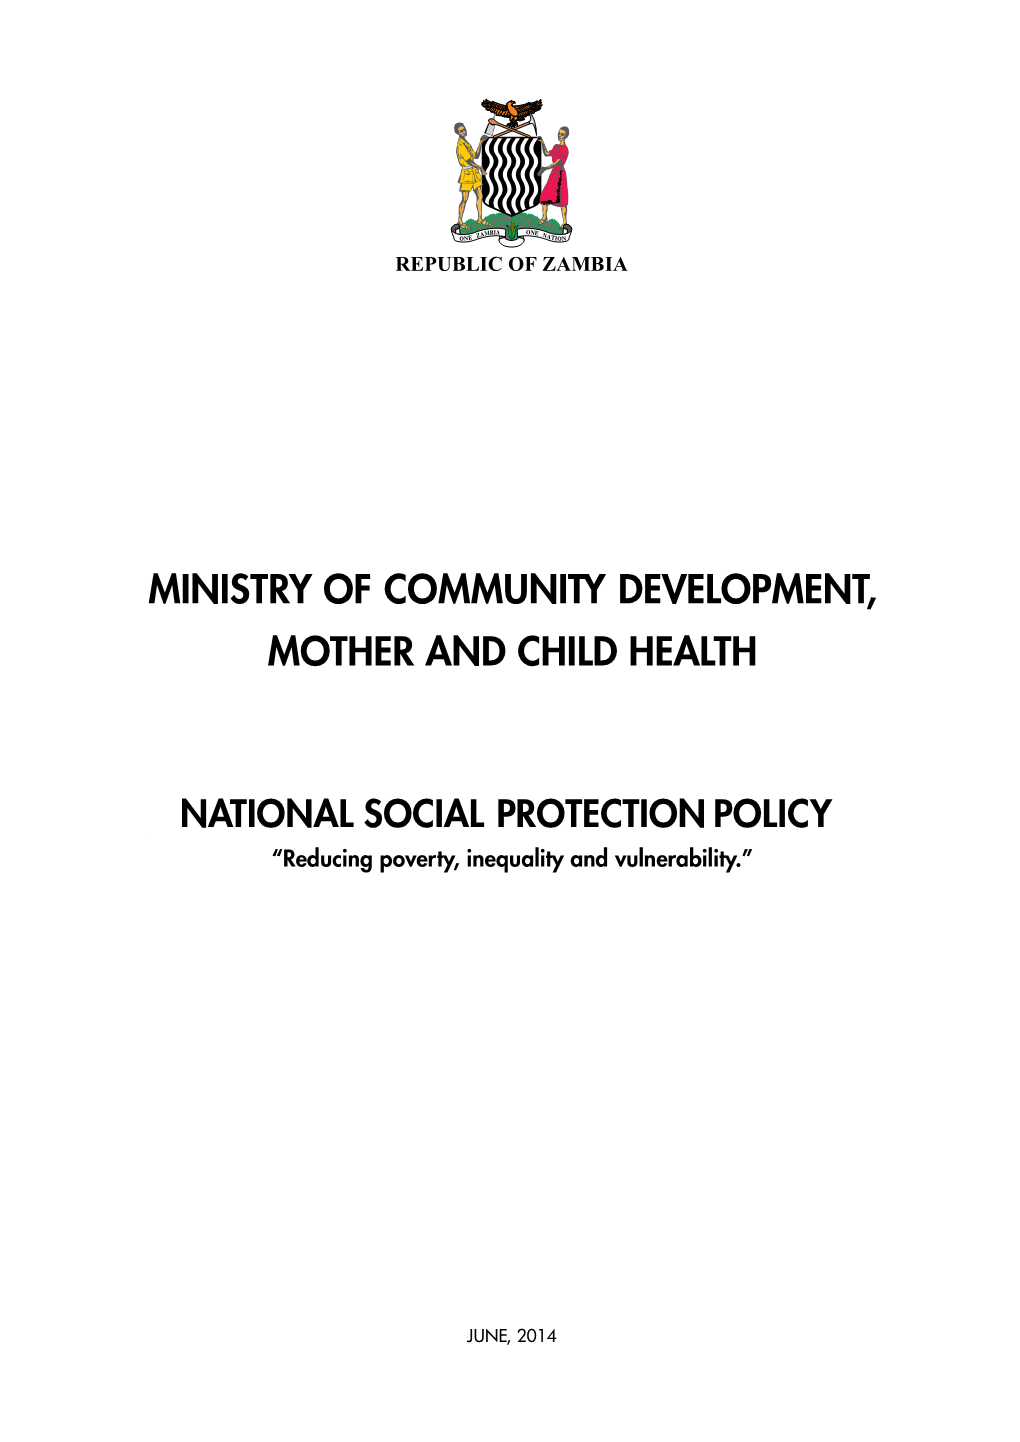 Ministry of Community Development, Mother and Child Health